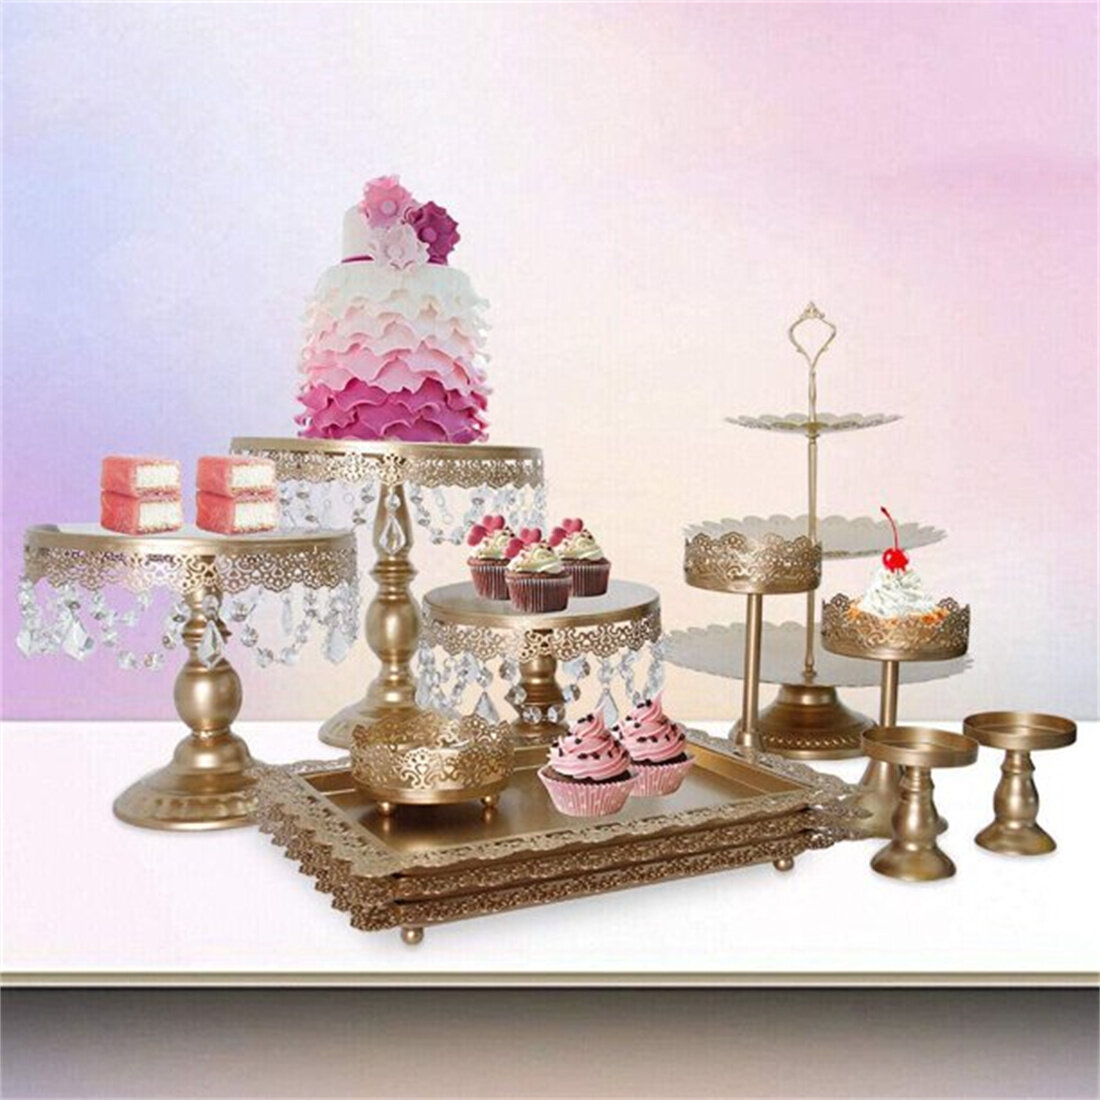 Metal Crystal Cake Holder Cupcake Stands with Pendants and Beads Cake Stand Dessert Wedding Birthday Dessert Cupcake Pedestal Display Cake Stands Silver, 1